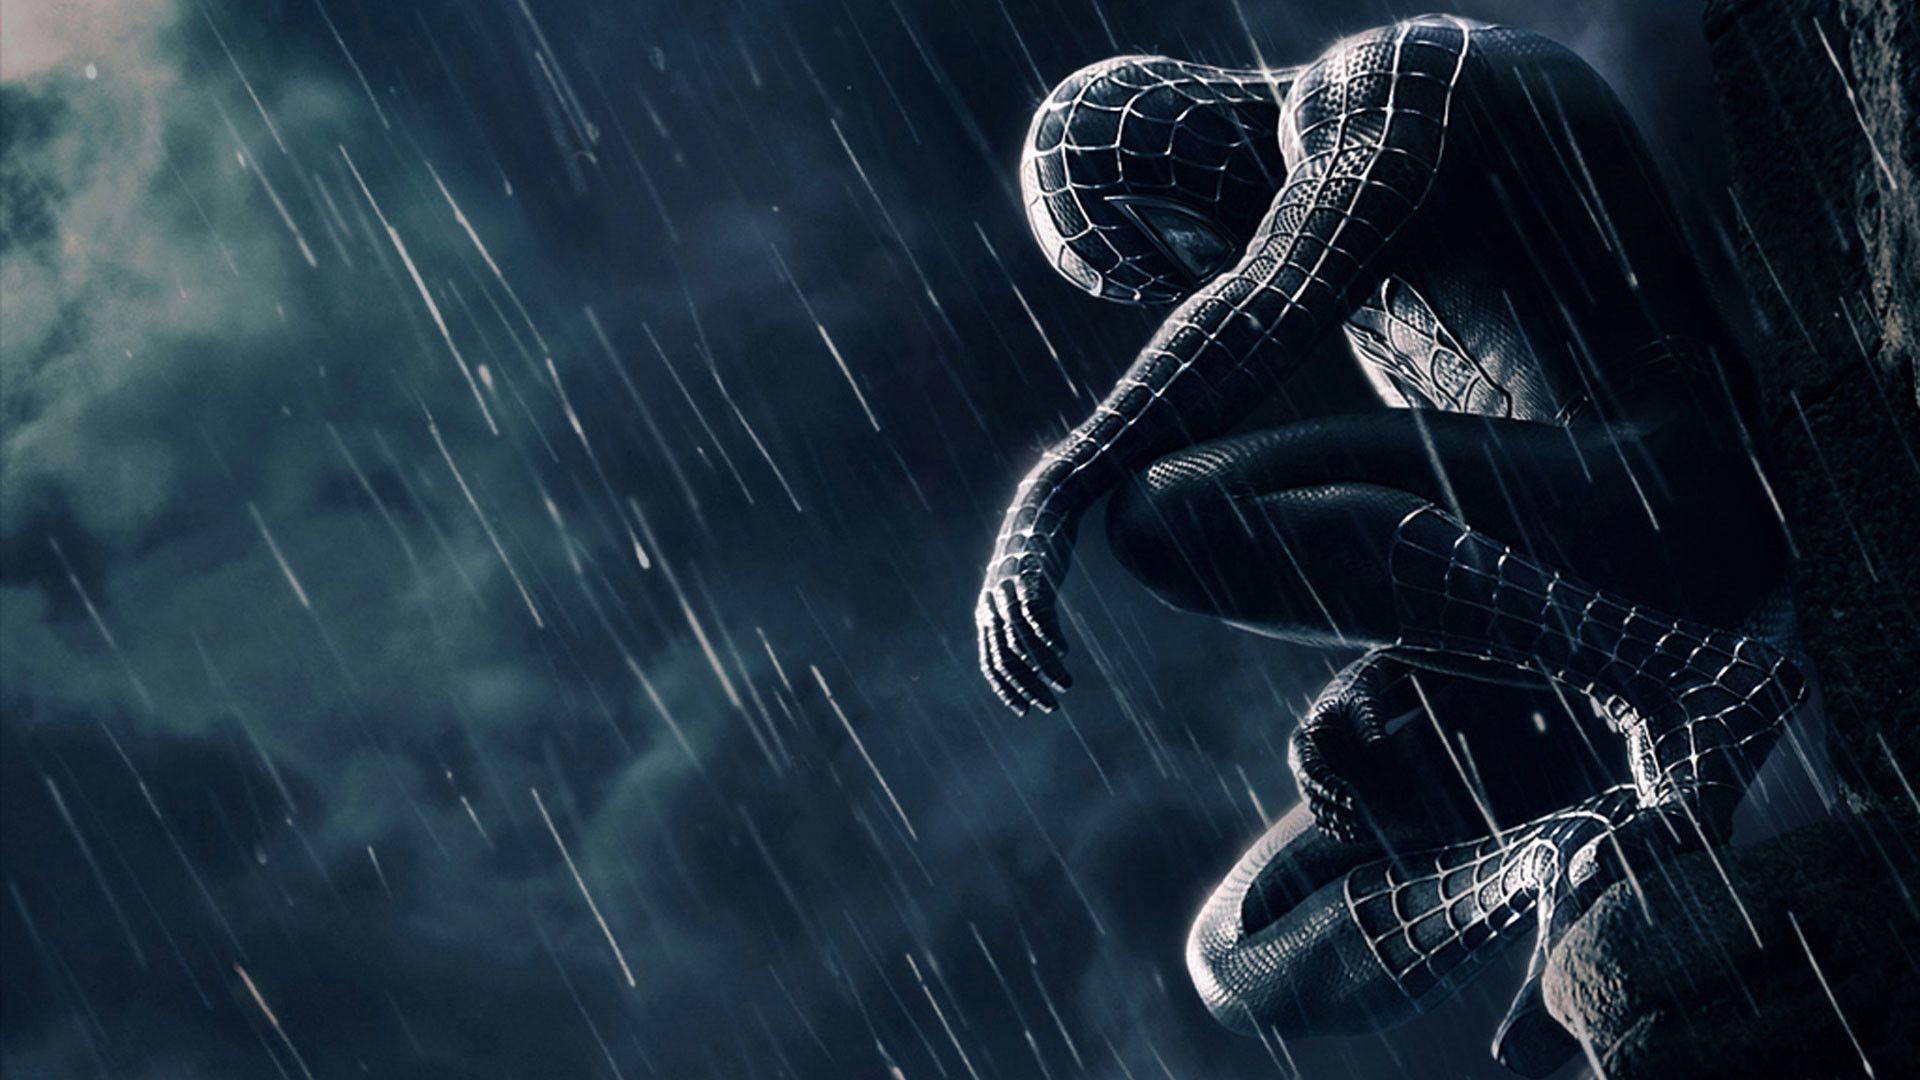 Black Spiderman Wallpapers For PC Wallpaper Cave